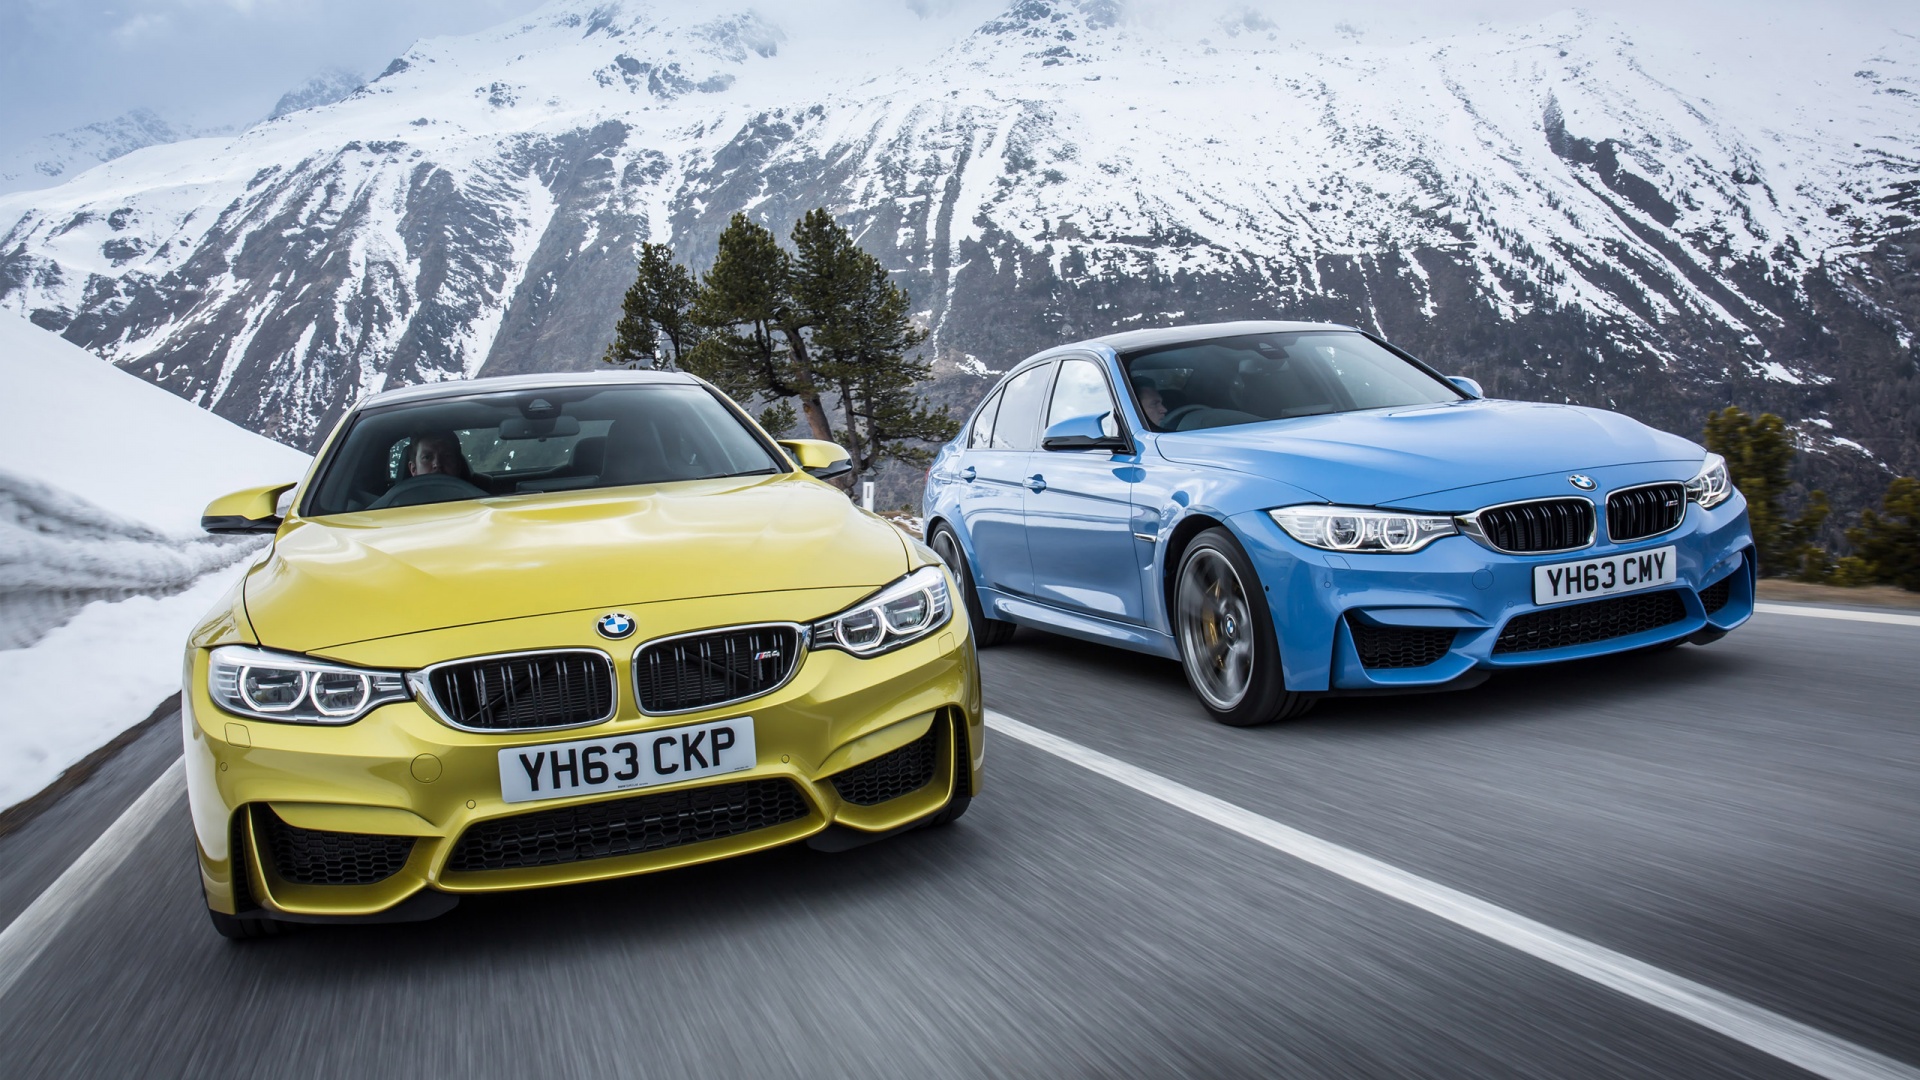 2014 BMW M4 Coupe UK Wallpaper HD Car Wallpapers